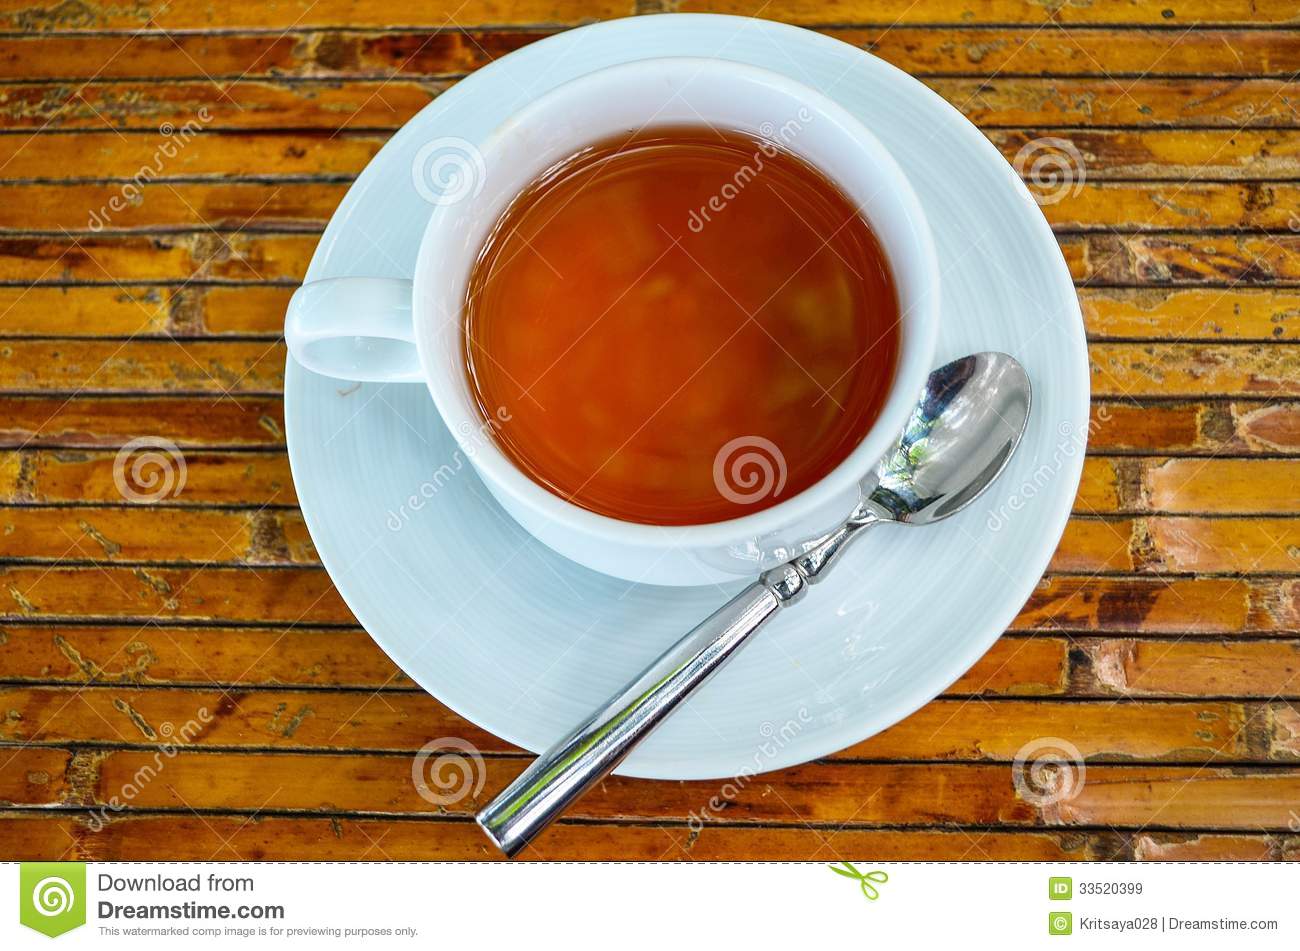 Cup Of Tea On A Bamboo Plate Royalty Free Stock Images   Image    